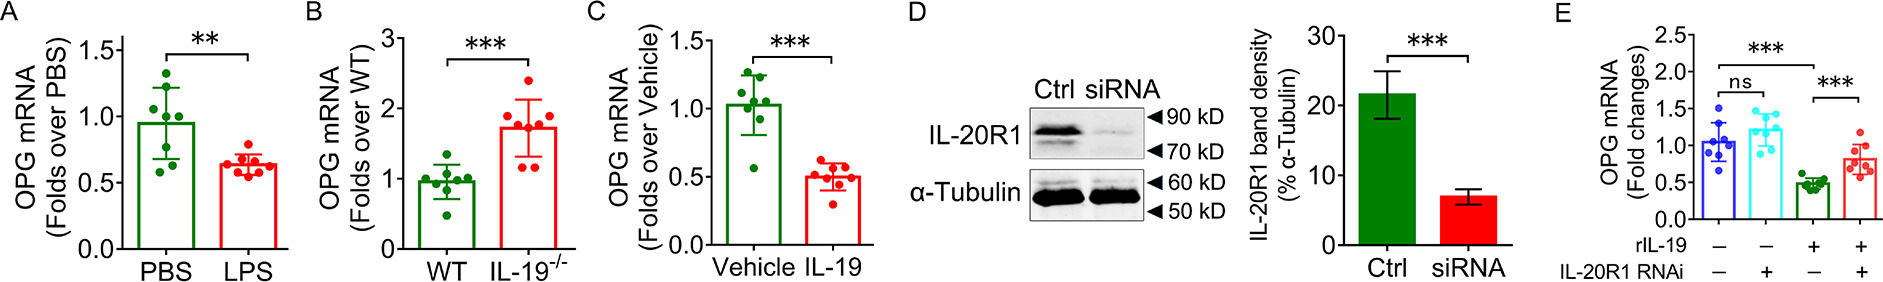 Fig. 5 
            
              Interleukin (IL)-19 suppresses osteoprotegerin (OPG) expression in bone mesenchymal stem cells (BMSCs). a) OPG messenger RNA (mRNA) expression of BMSCs in lipopolysaccharide (LPS)-induced bone loss of mice, determined by quantitative real-time polymerase chain reaction (RT-qPCR) (n = 8). b) OPG mRNA expression of BMSCs in LPS-induced bone loss of IL-19-/- mice, determined by RT-qPCR (n = 8). c) OPG mRNA expression in in vitro primary BMSCs culture in response to 100 ng/ml recombinant IL-19 treatment for 48 hours, determined by RT-qPCR (n = 8). d) Lentivirus-mediated stable knockdown of IL-20R1 in in vitro BMSCs culture, determined by western blot. e) OPG mRNA expression in in vitro primary BMSCs culture in response to IL-20R1 knockdown and/or 100 ng/ml recombinant IL-19 treatment for 48 hours, determined by RT-qPCR (n = 8). α-tubulin was used as loading control in RT-qPCR and western blot. Data are representative of three independent experiments, and shown as means and standard deviations. P-values were determined by independent-samples t-test (a, b, c, d) and one-way analysis of variance (ANOVA) followed by Tukey’s test (e). **p < 0.01, ***p < 0.001. Ctrl, control; ns, no significance; rIL-19, recombinant IL-19; RNAi, RNA interference; siRNA, small interfering RNA; WT, wild-type.
          